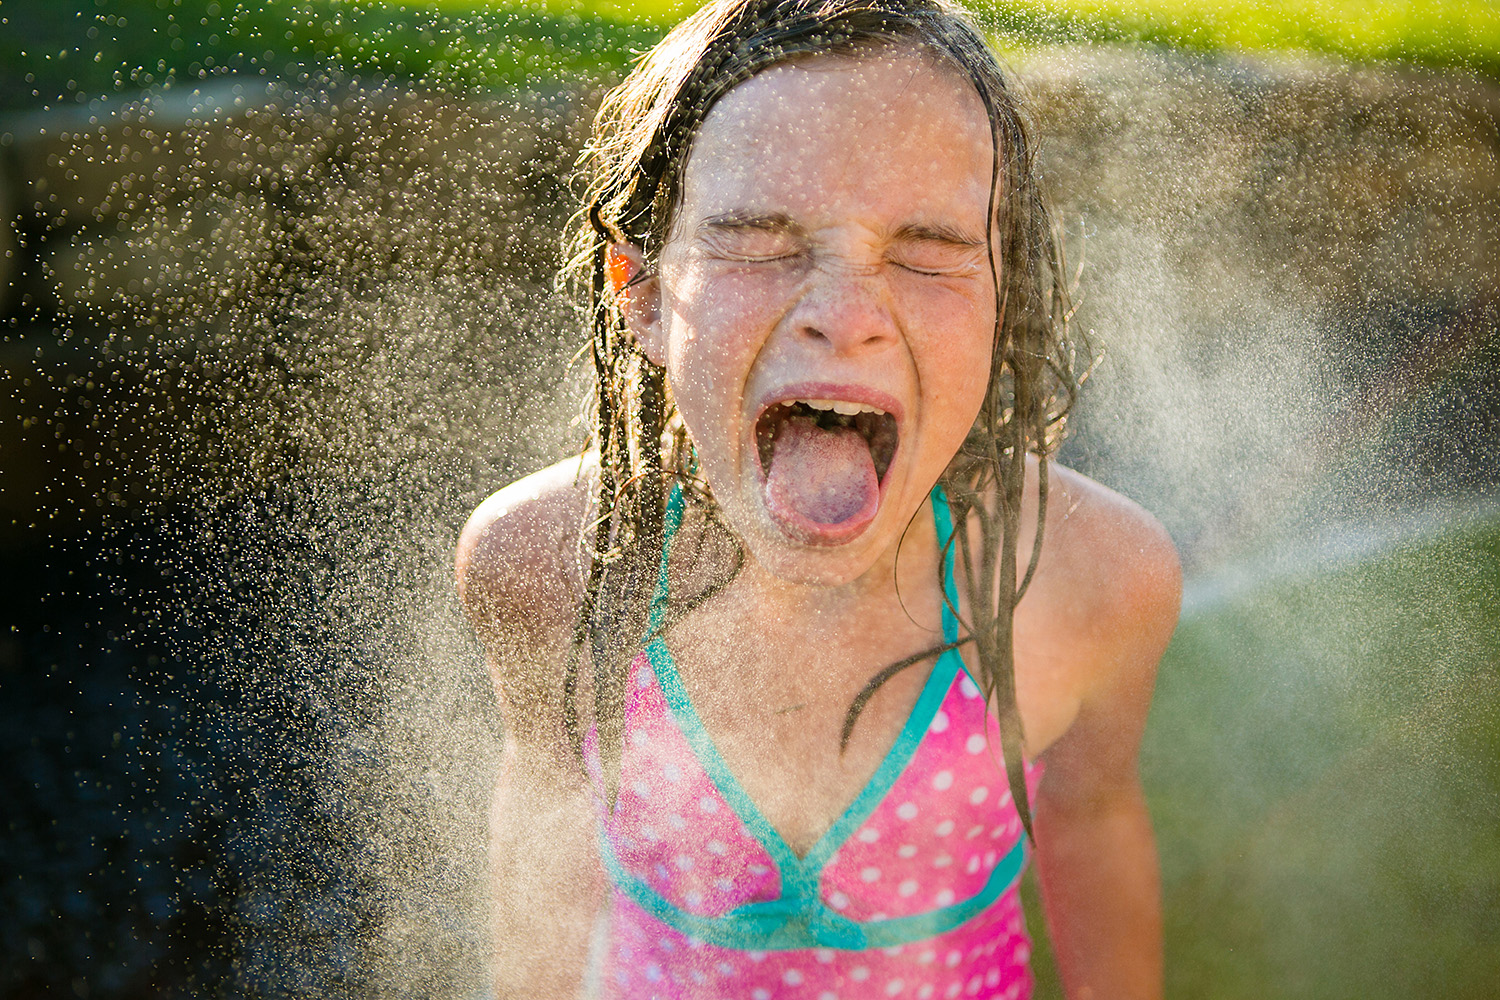 A quirky photograph of a girl playing in a sprinkler by Dana Pugh